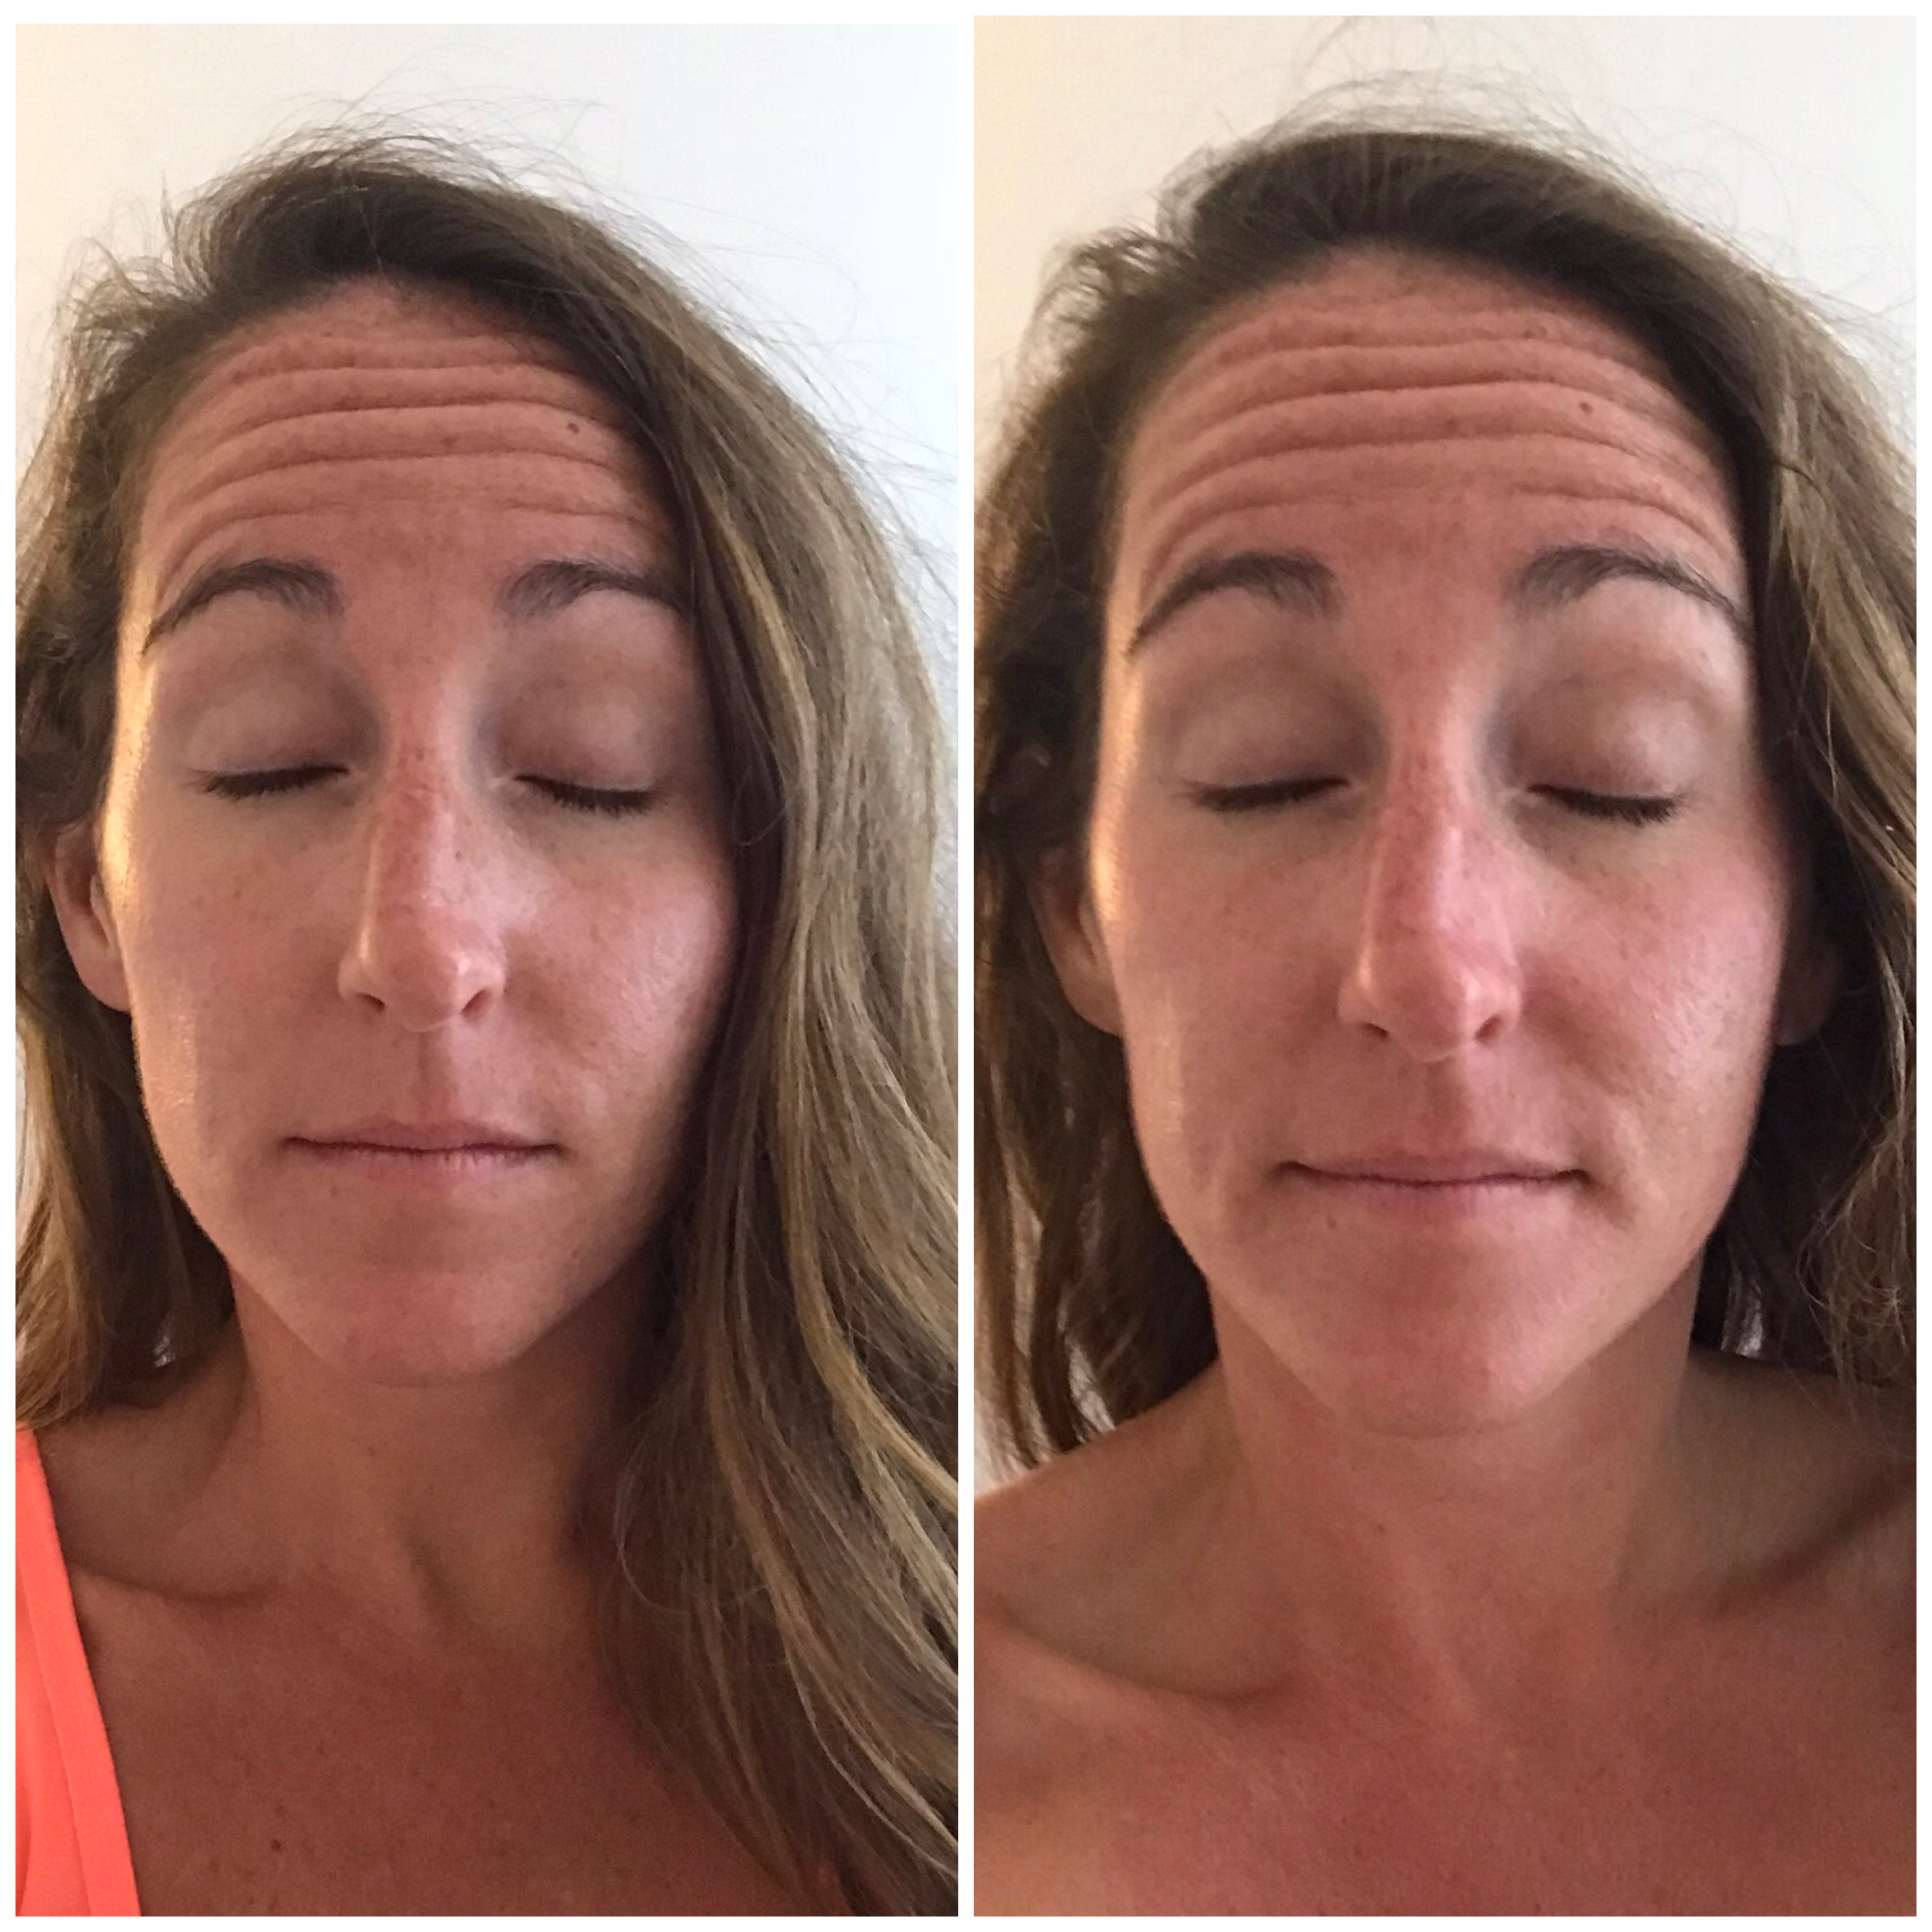 My Experience Getting A HydraFacial At Honolulu Spa + Wellness - Best Facial Honolulu - Honolulu Facial - Honolulu Spa - HydraFacial Near Me Honolulu - HydraFacial Before and After - HydraFacial Results - Spa Honolulu - Honolulu Spa and Wellness